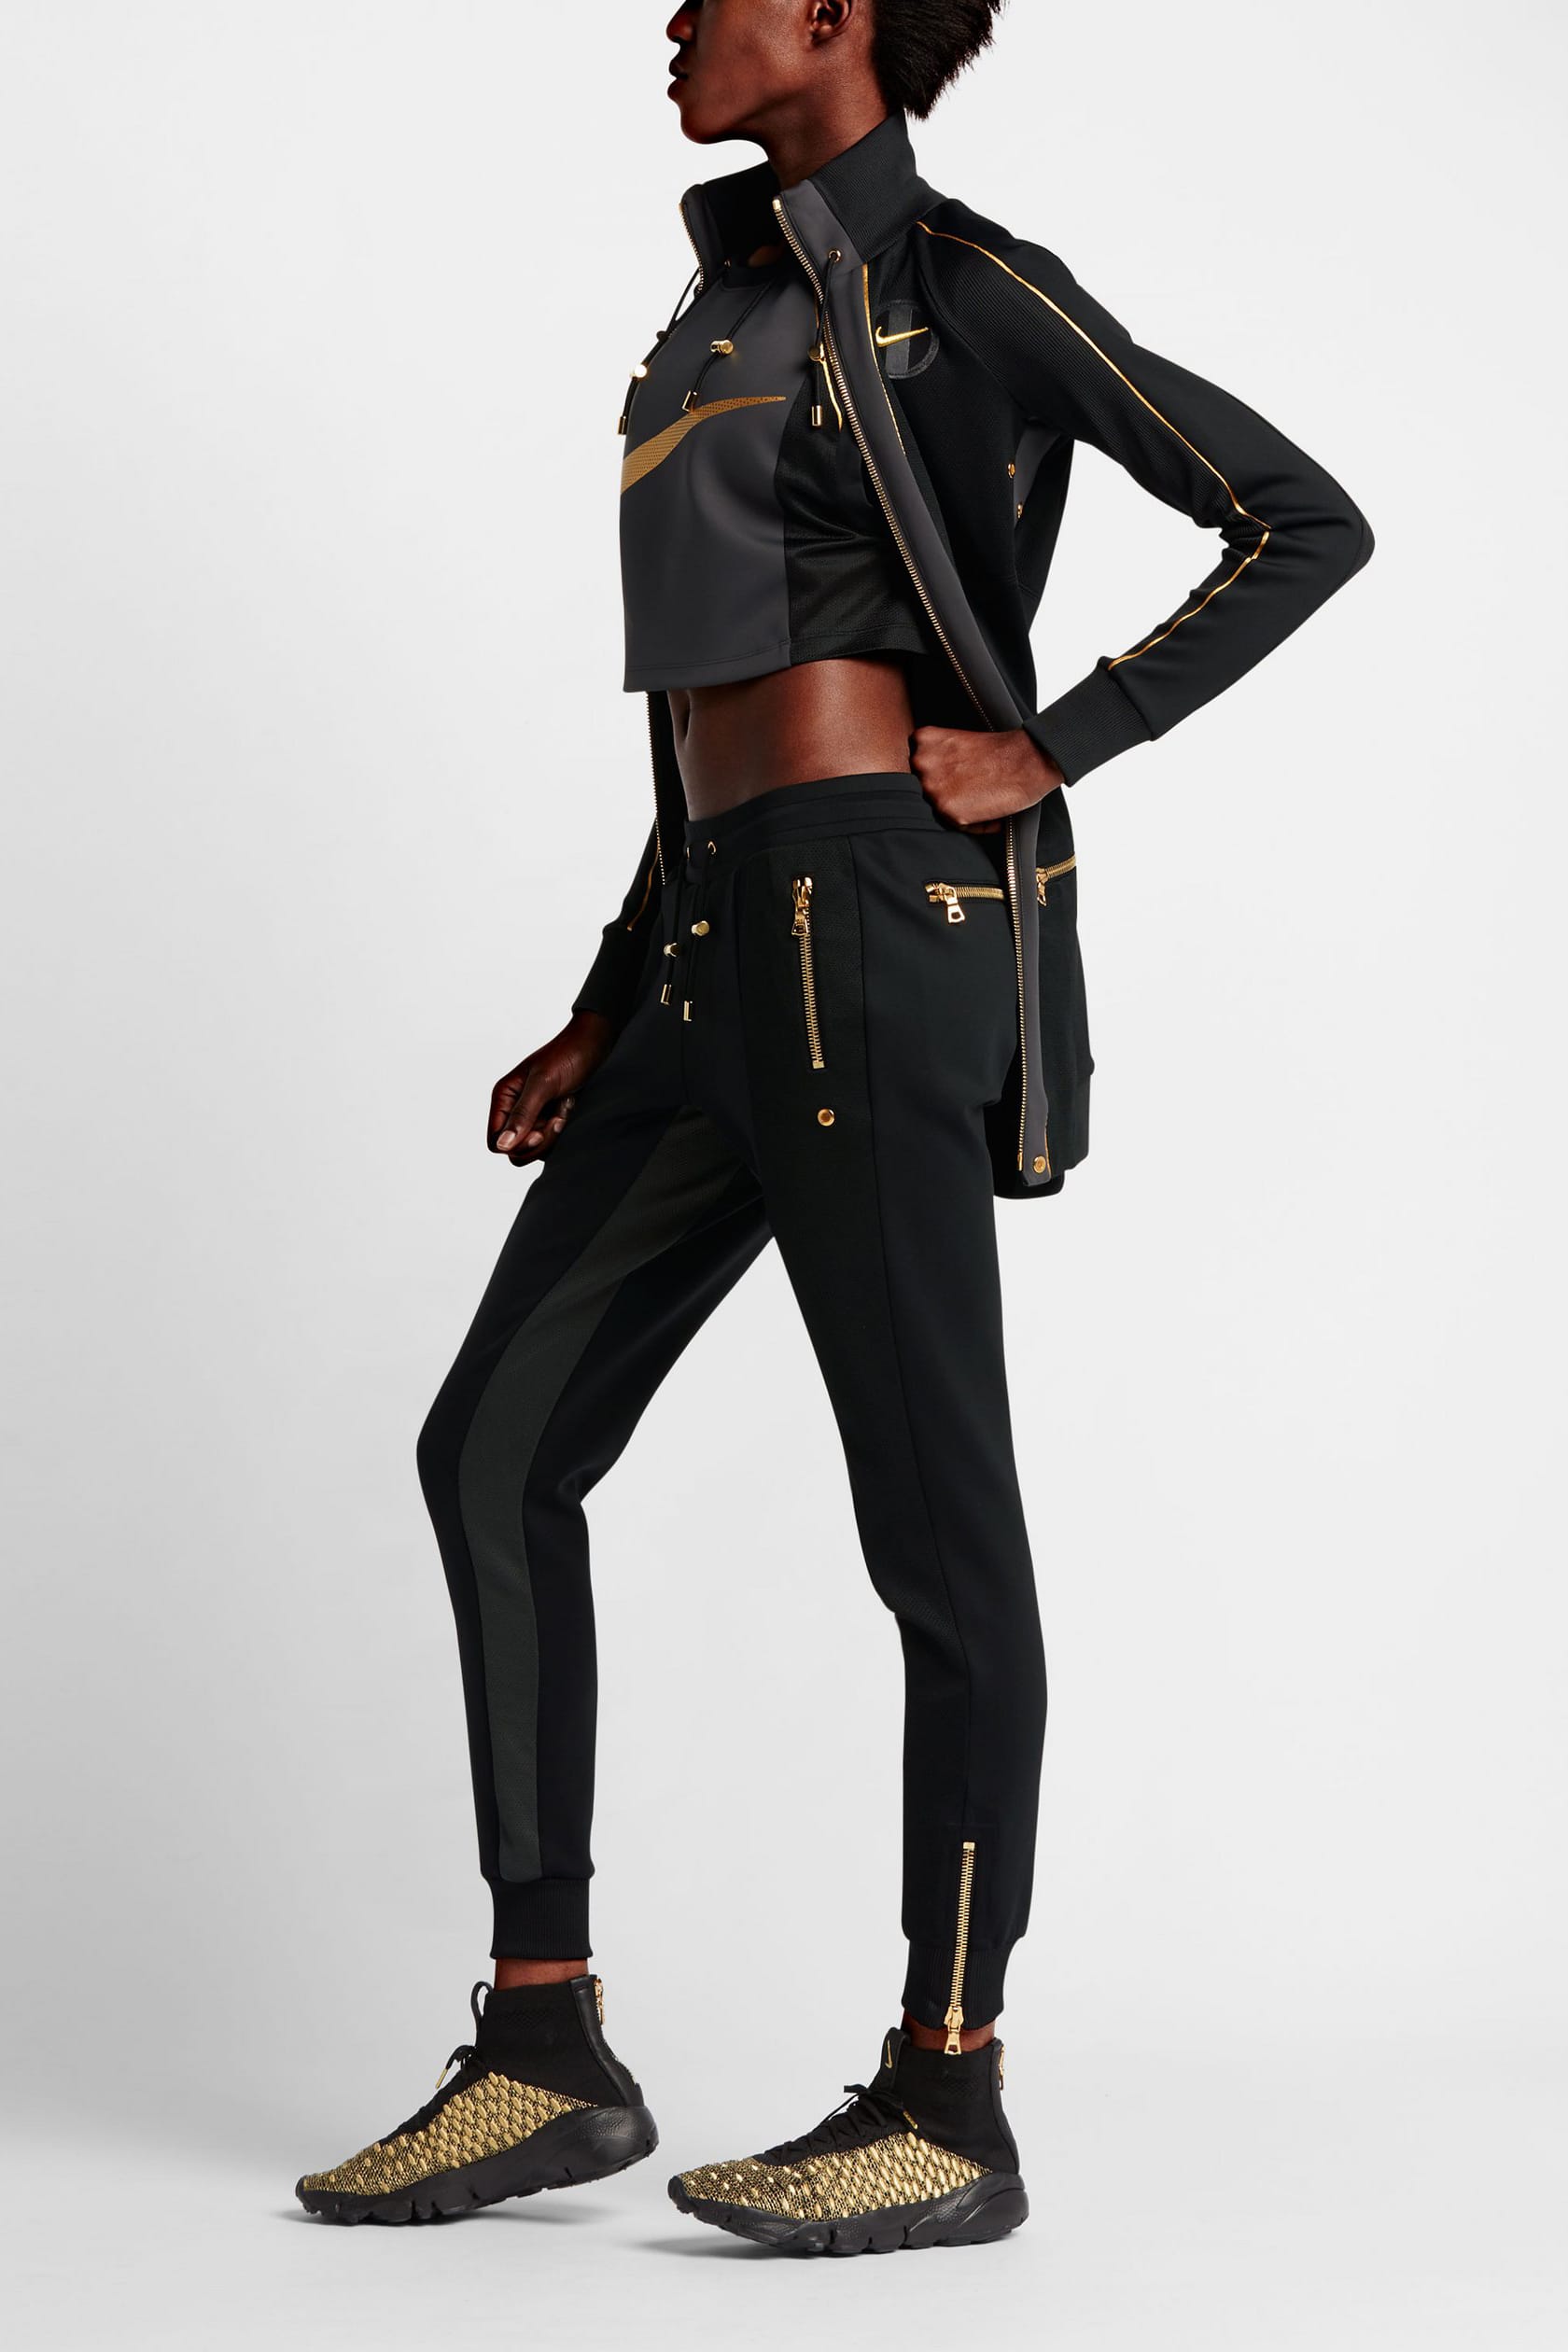 Olivier Rousteing x Nike Collection 